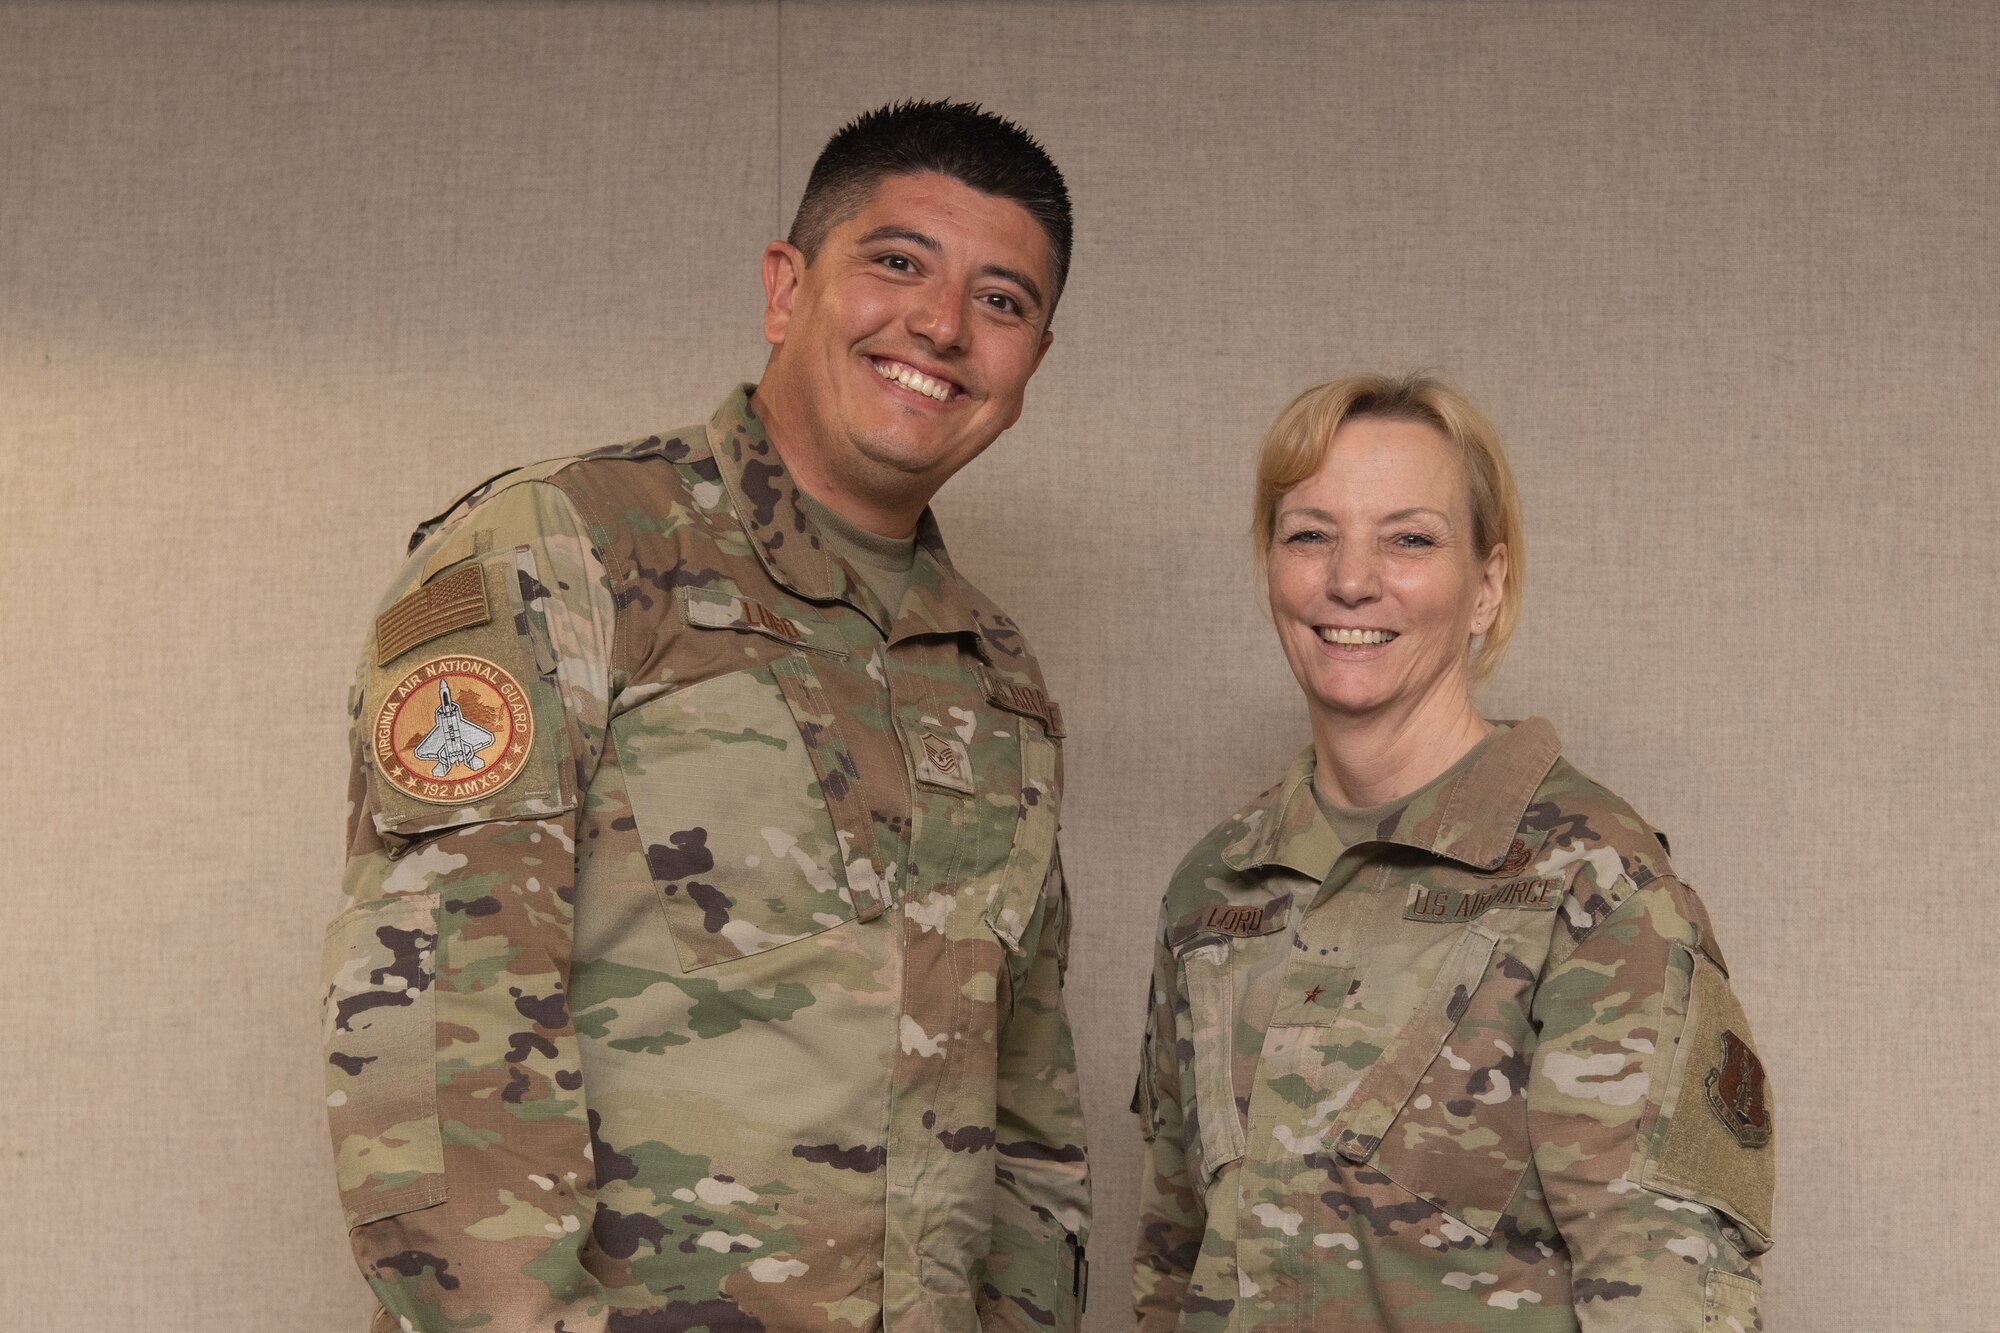 Two Airmen pose for a photo.